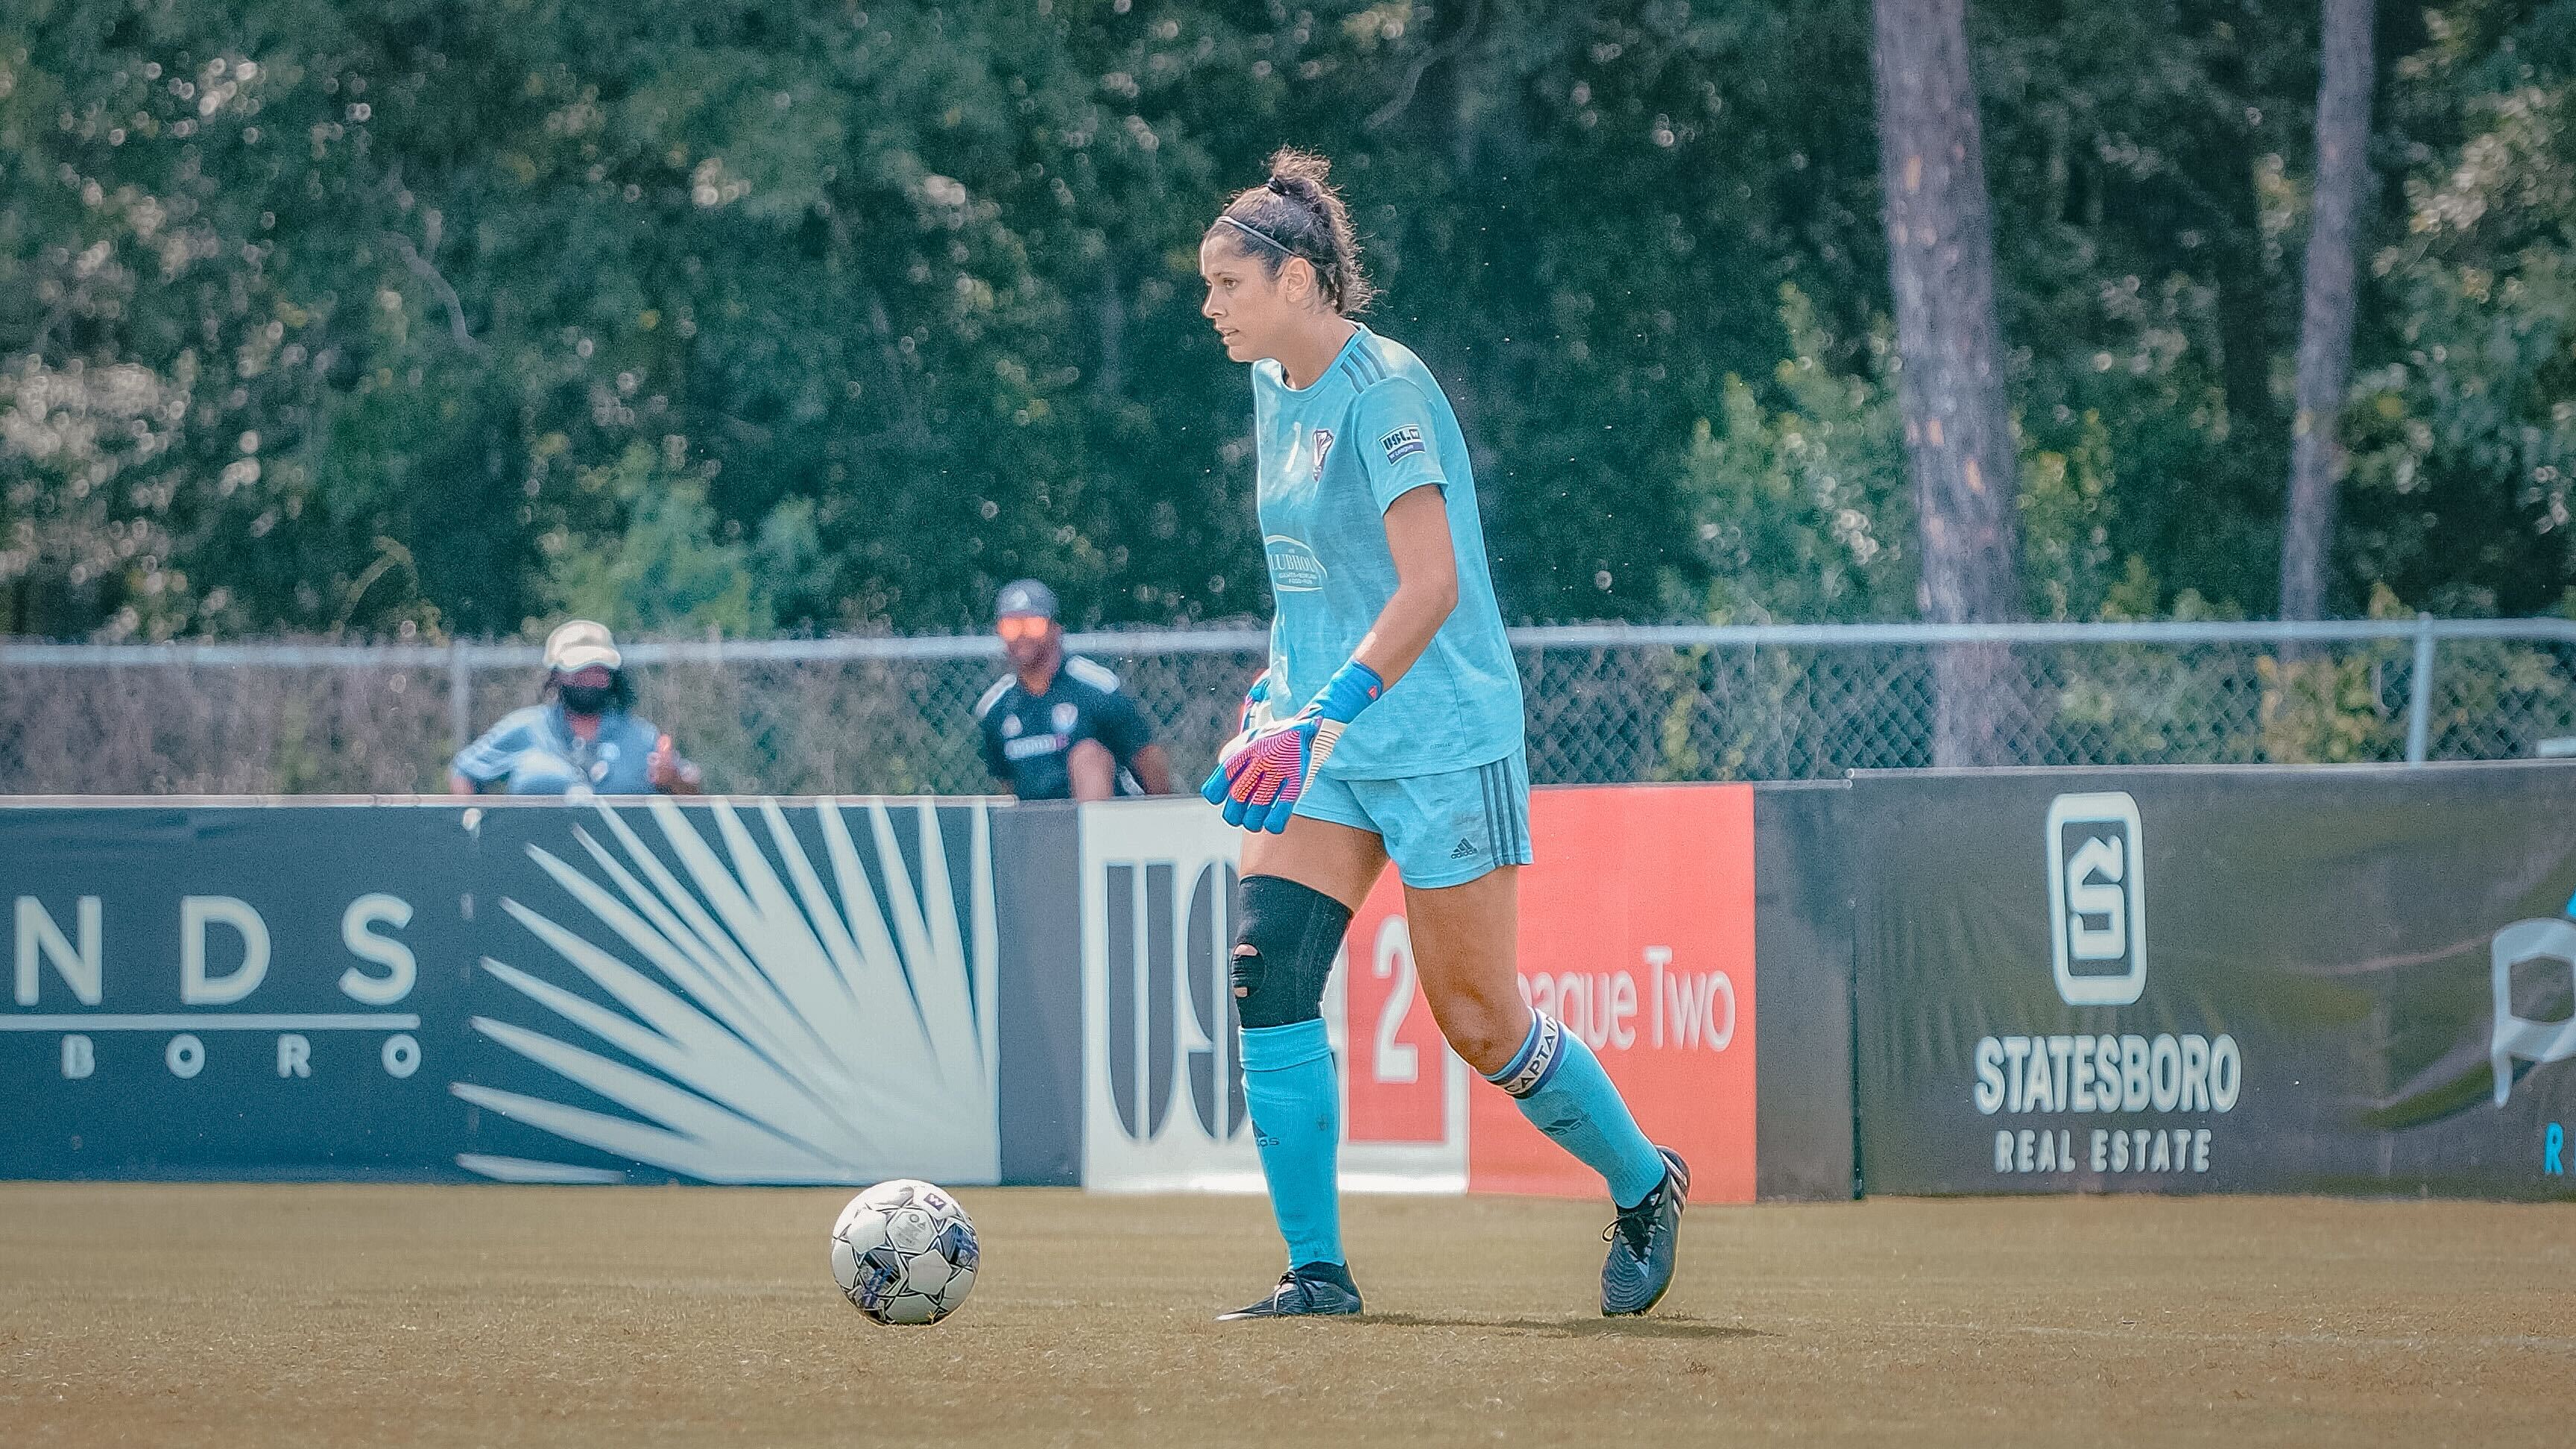 Sydney Martinez and Puerto Rico to Begin Gold Cup Group Stage featured image